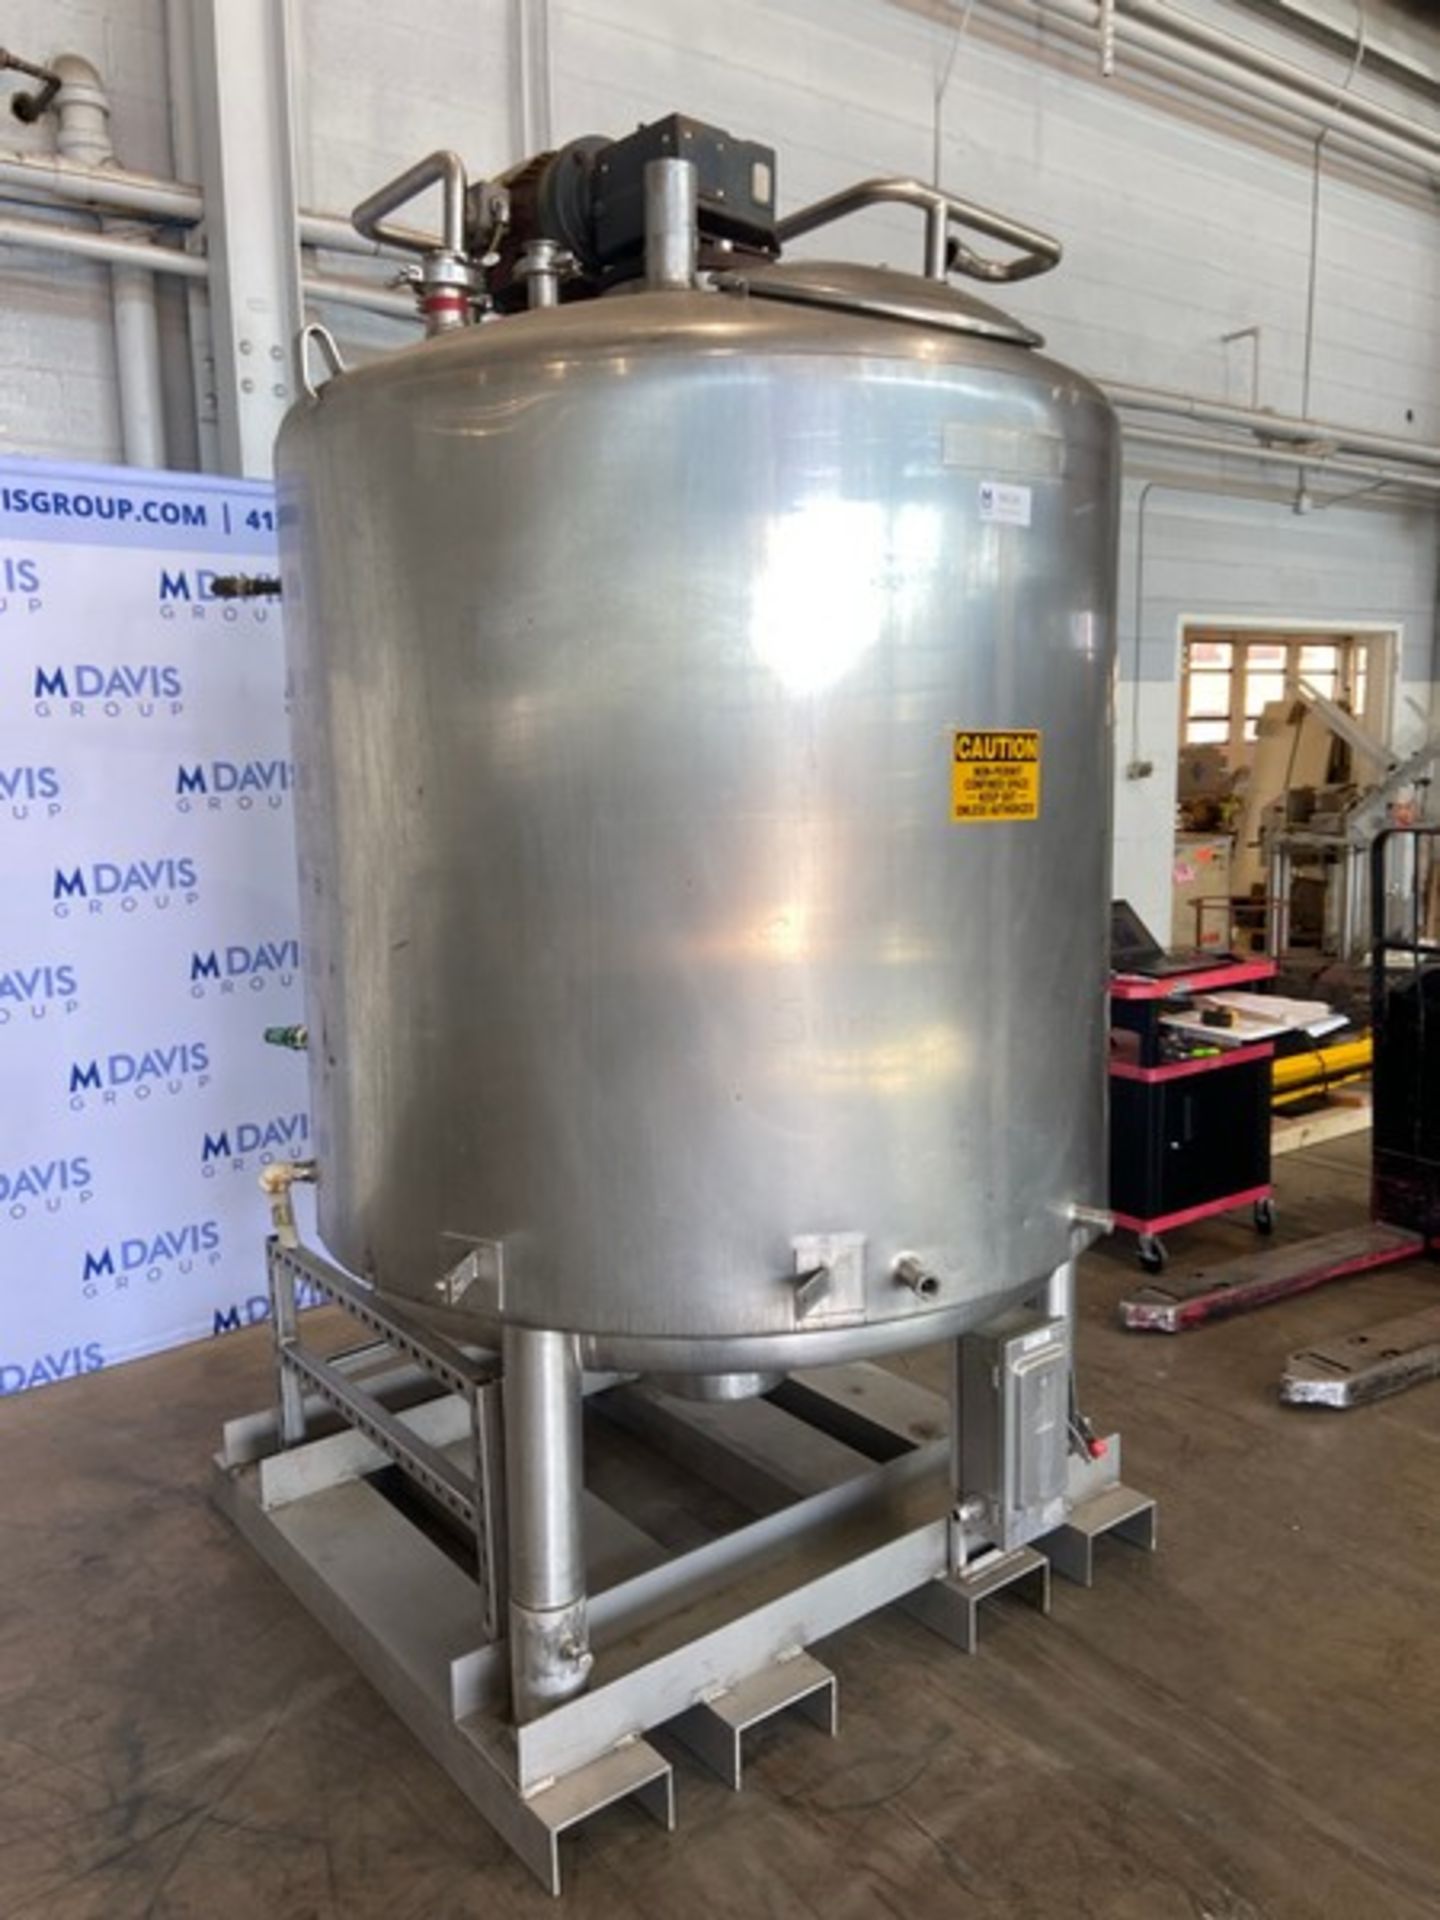 Mueller Aprox. 500 Gal. Jacketed S/S Tank,Internal Dims.: Aprox. 55" Tall x 52" Dia., with CIP Spray - Image 2 of 13